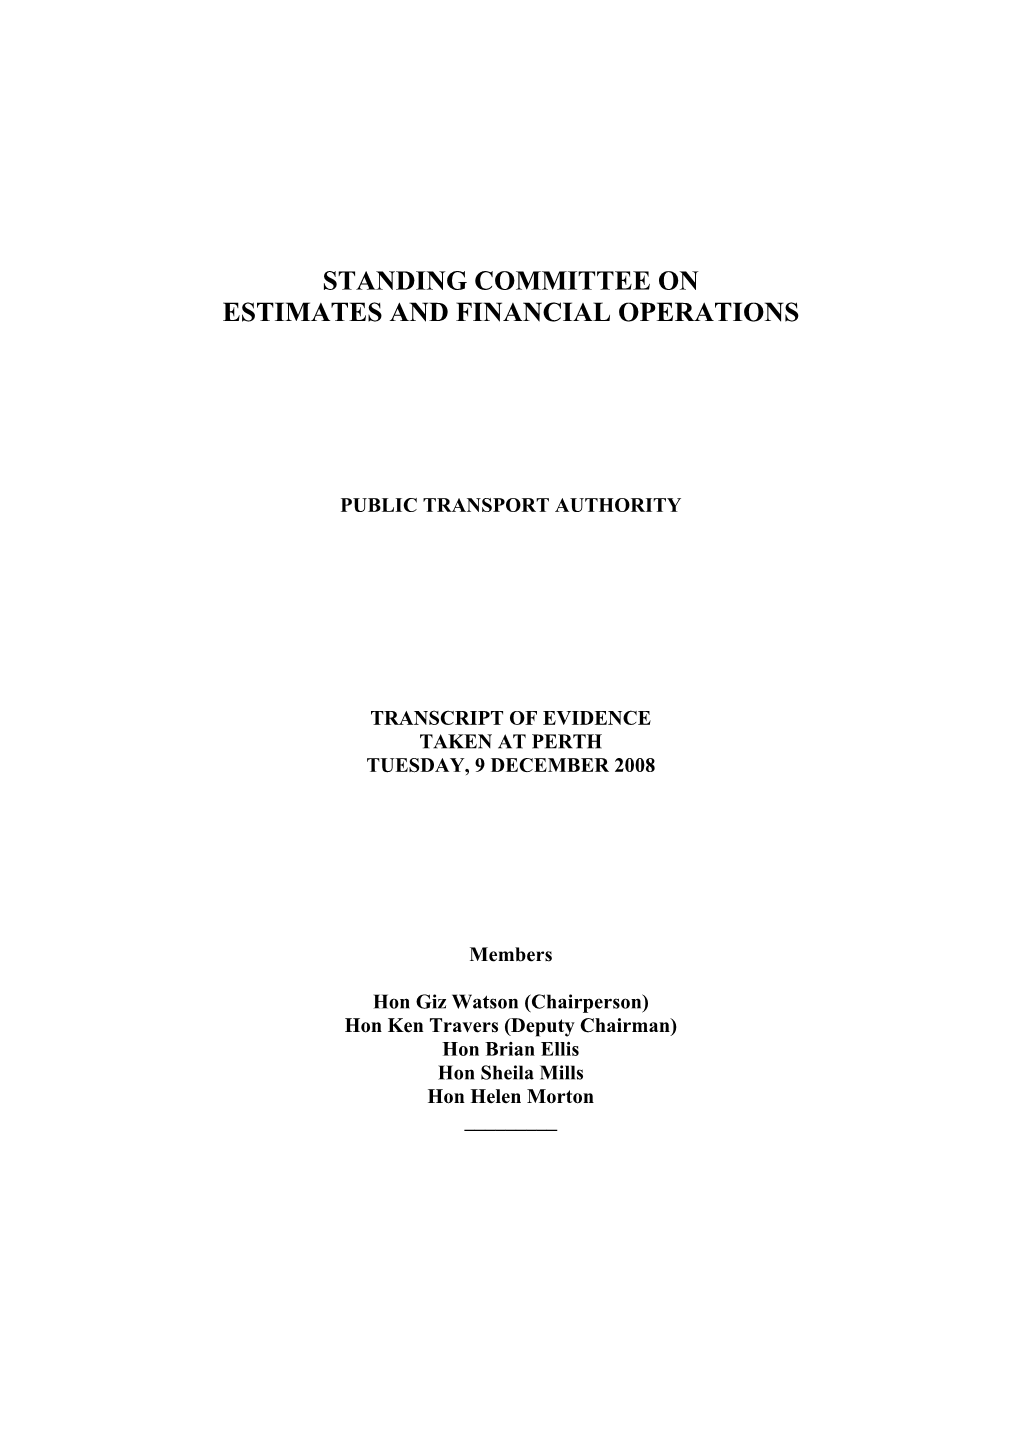 Standing Committee on Estimates and Financial Operations